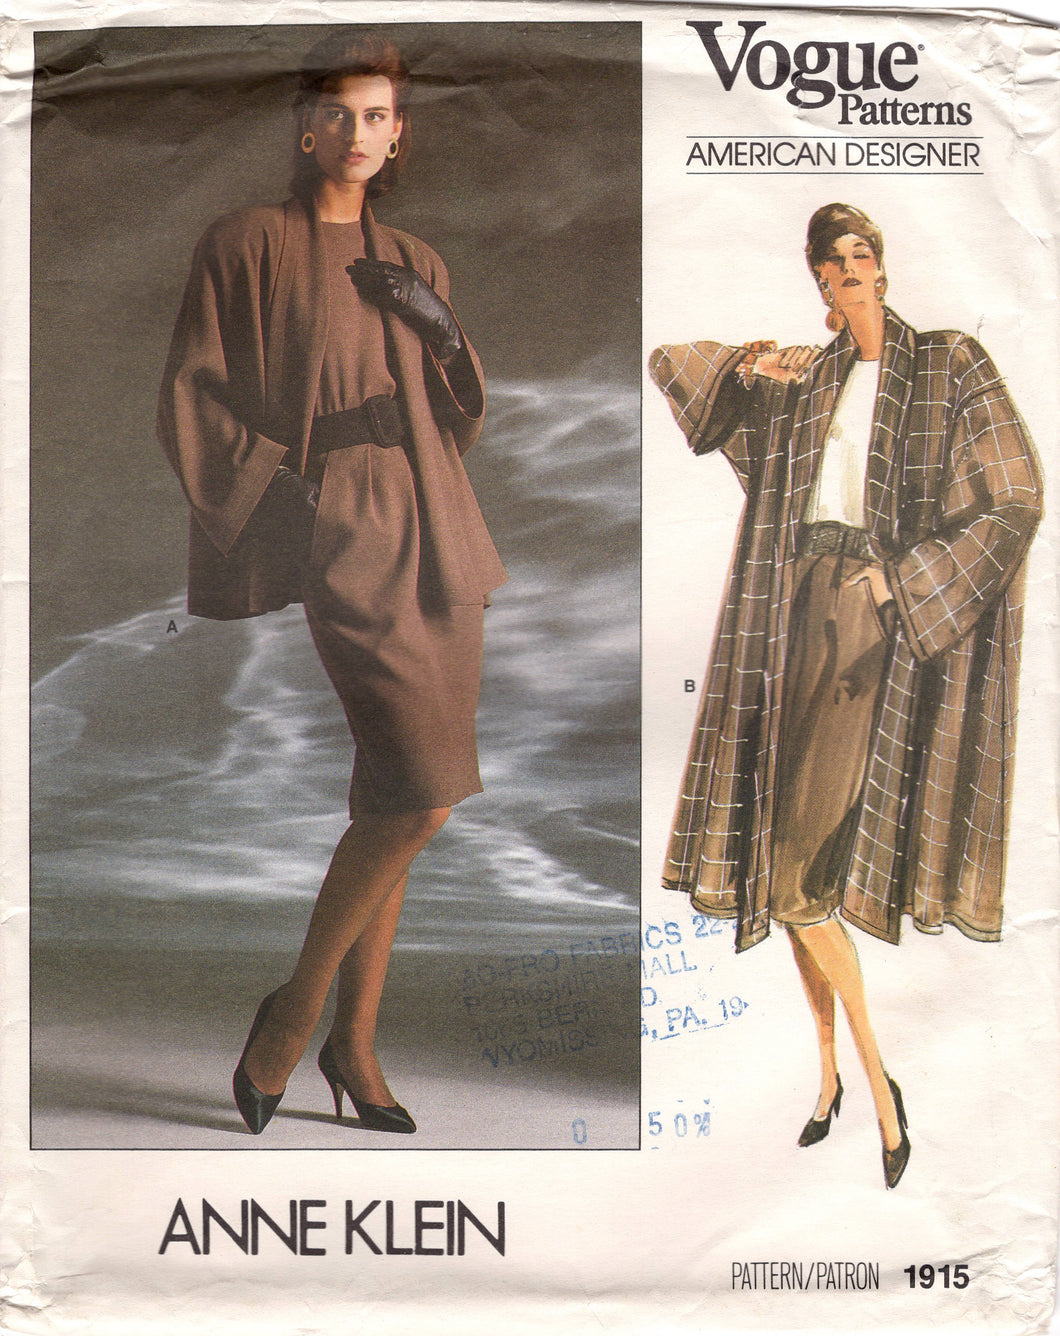 1980's Vogue American Designer Oversize Jacket, Coat, Tucked Blouse and Straight Skirt with Pockets- Anne Klein - Bust 31.5-34